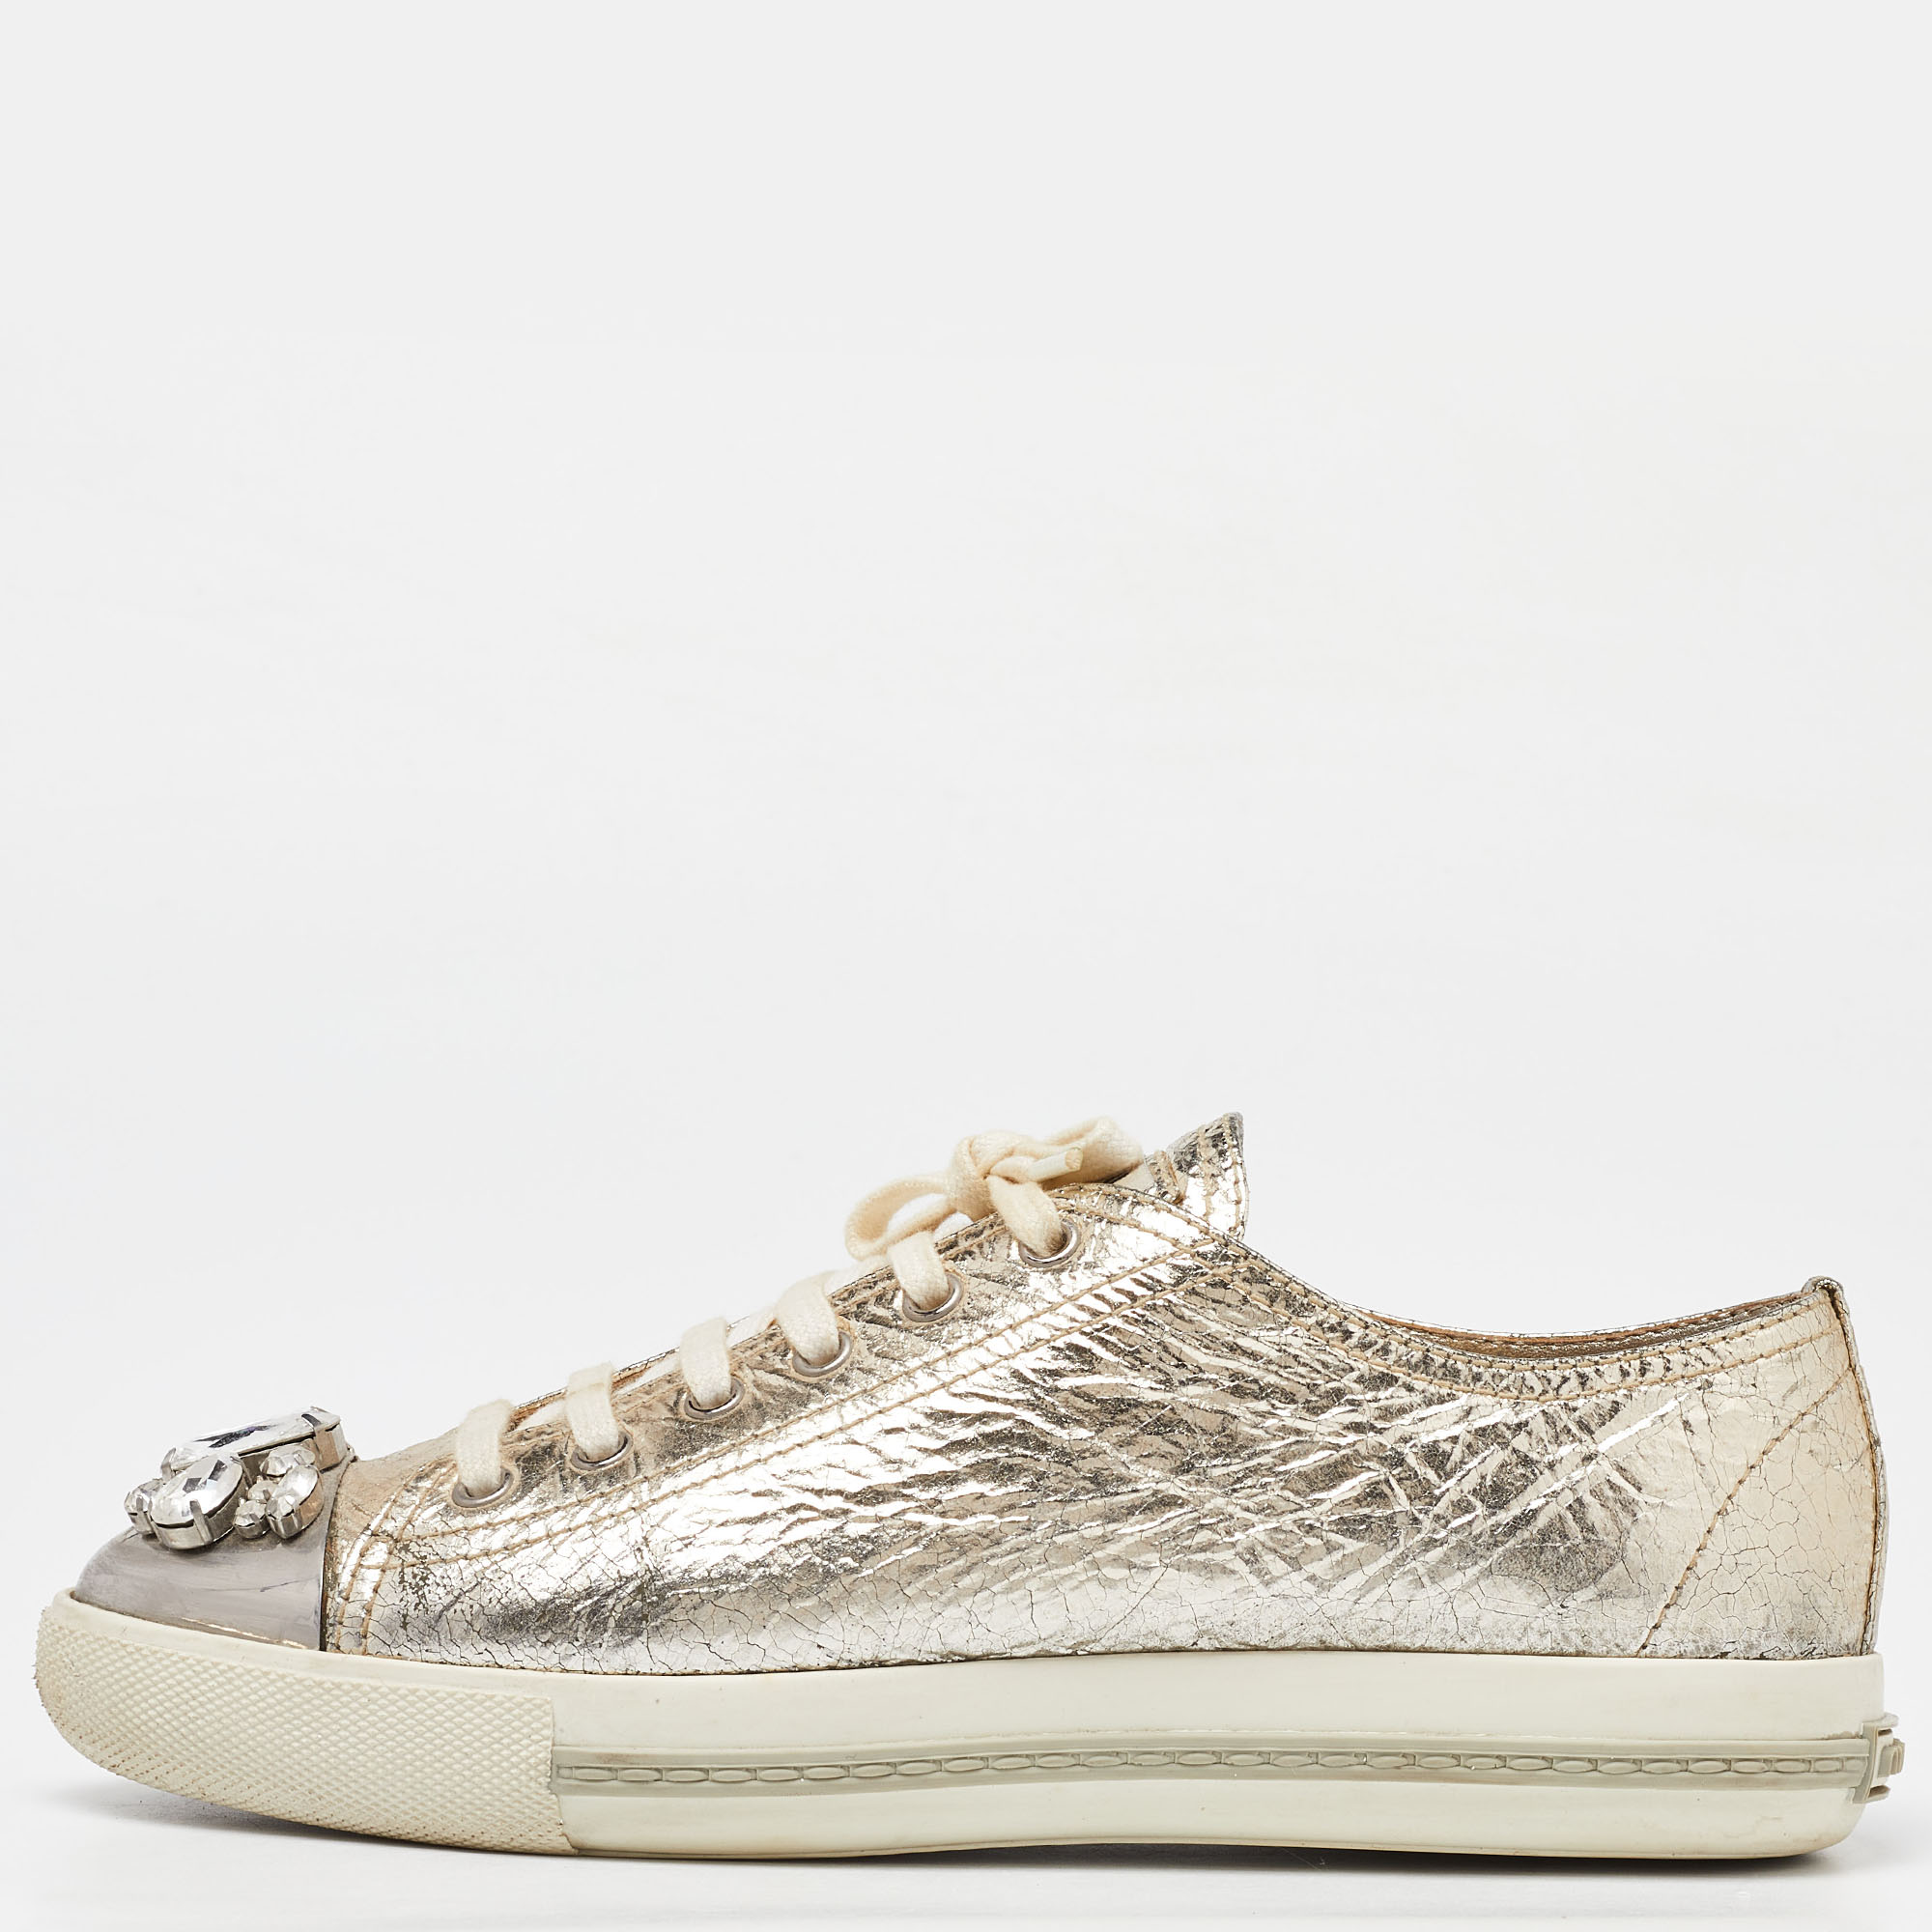 Miu miu gold leather crystal embellished cap-toe low-top sneakers size 39